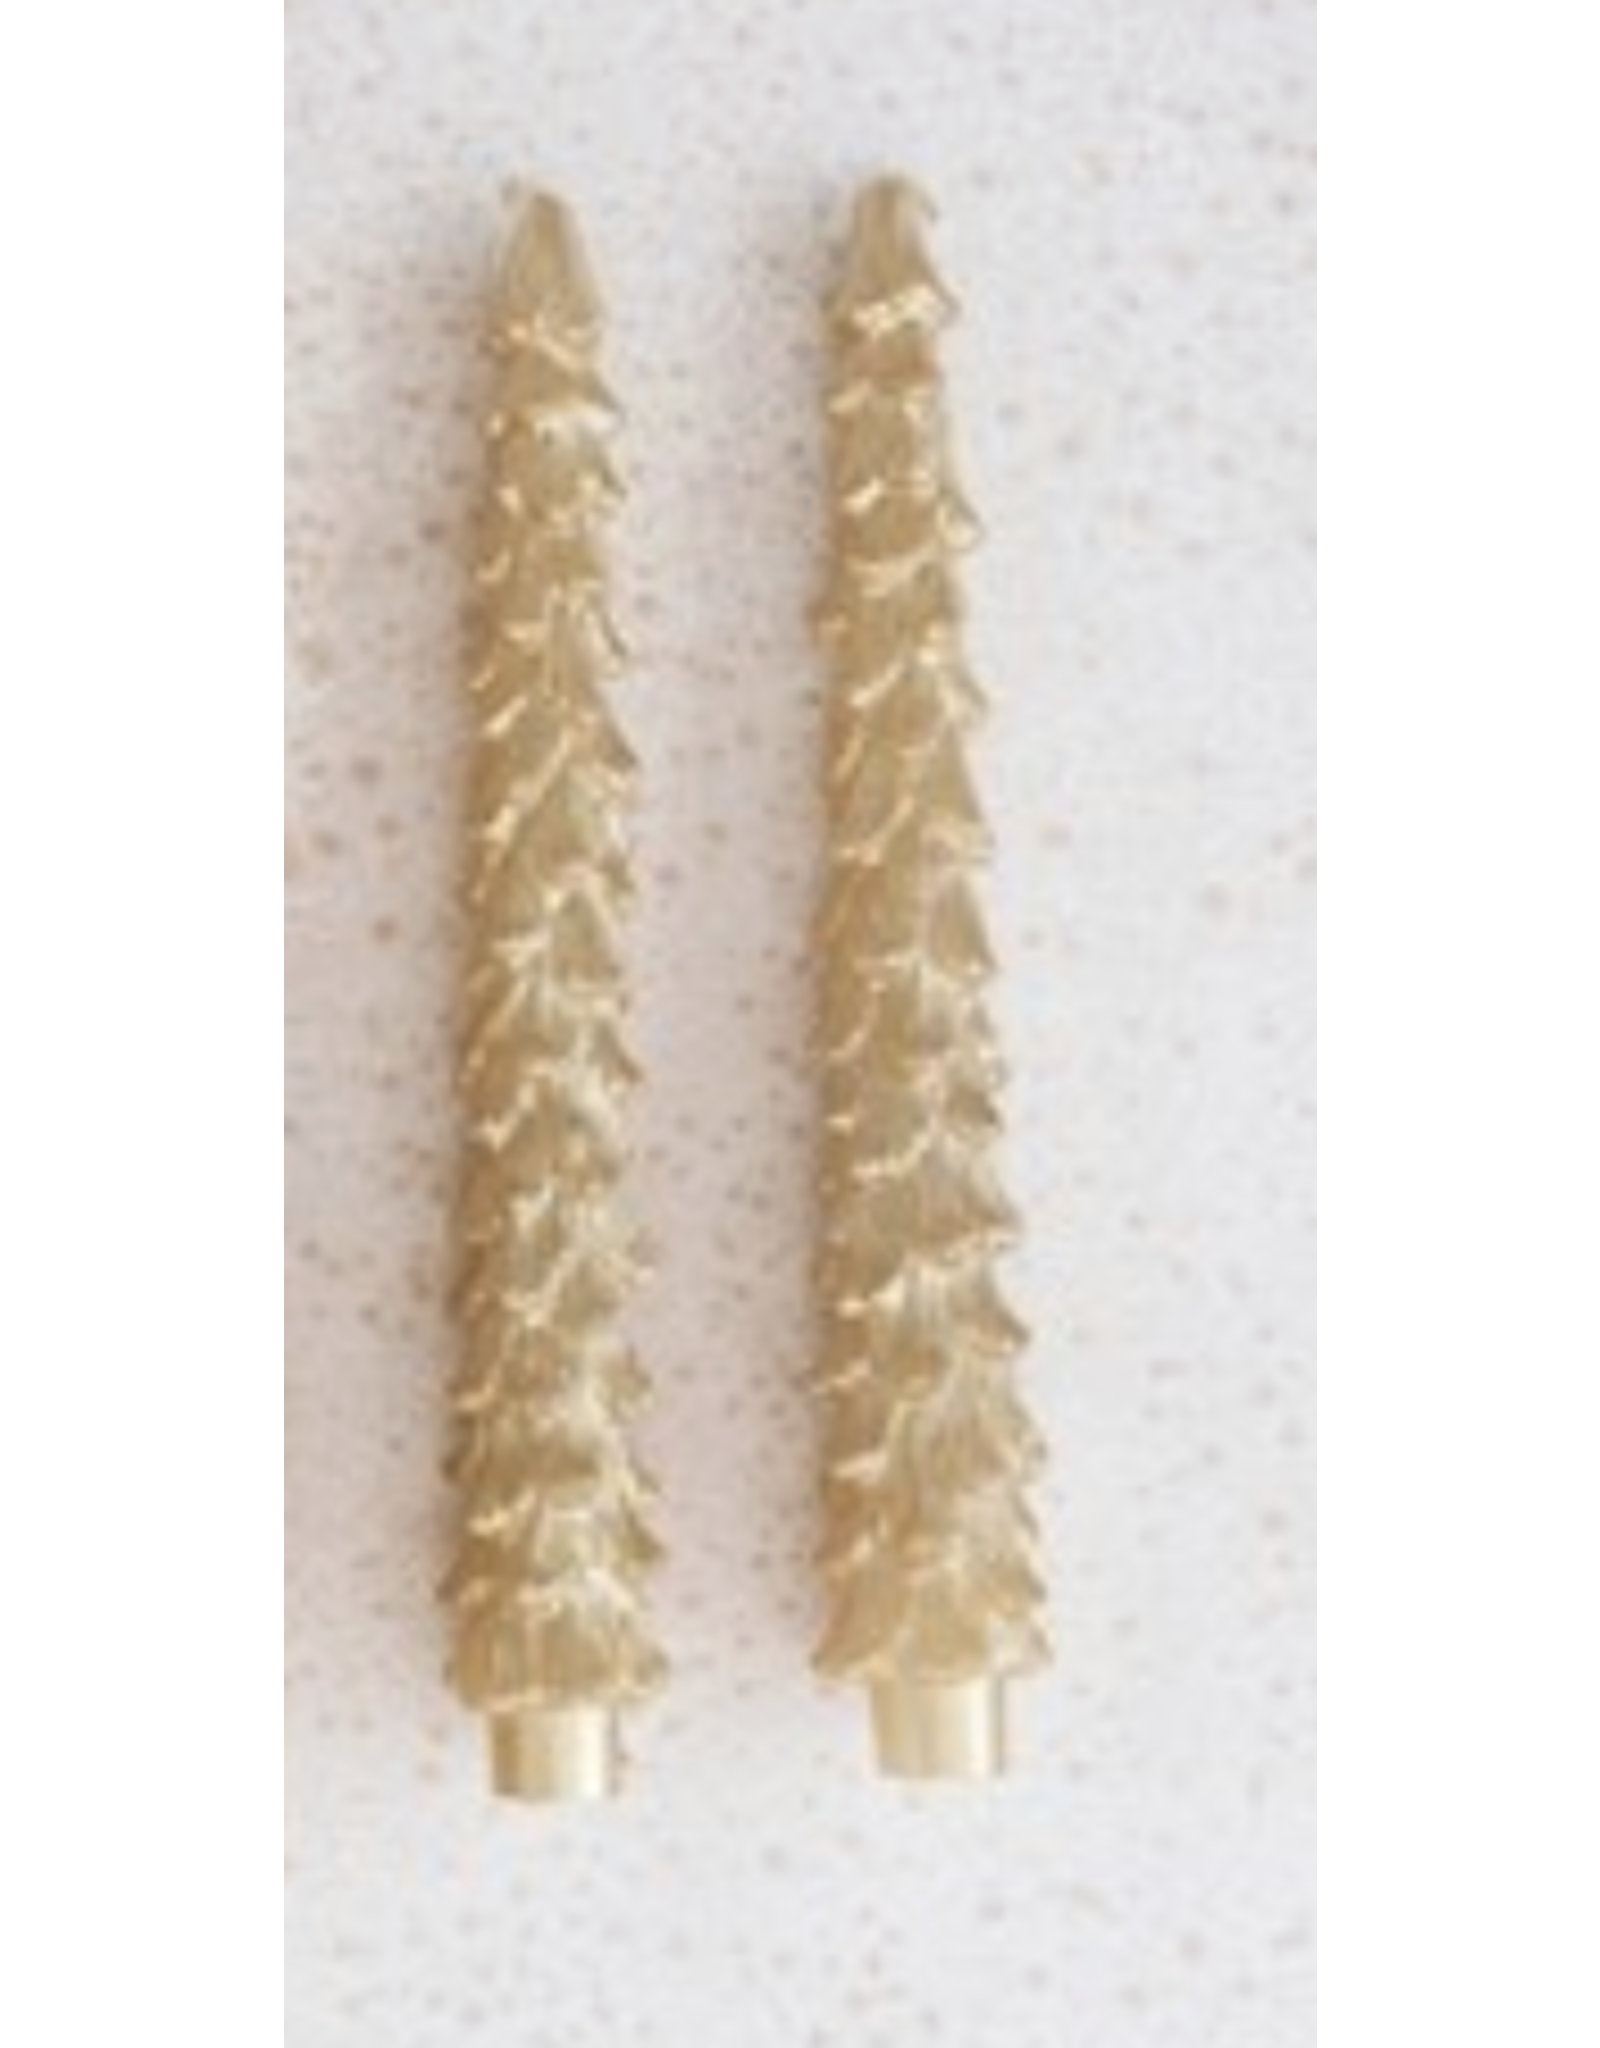 Creative Co-Op Unscented Tree Shaped Taper Candles, set of 2